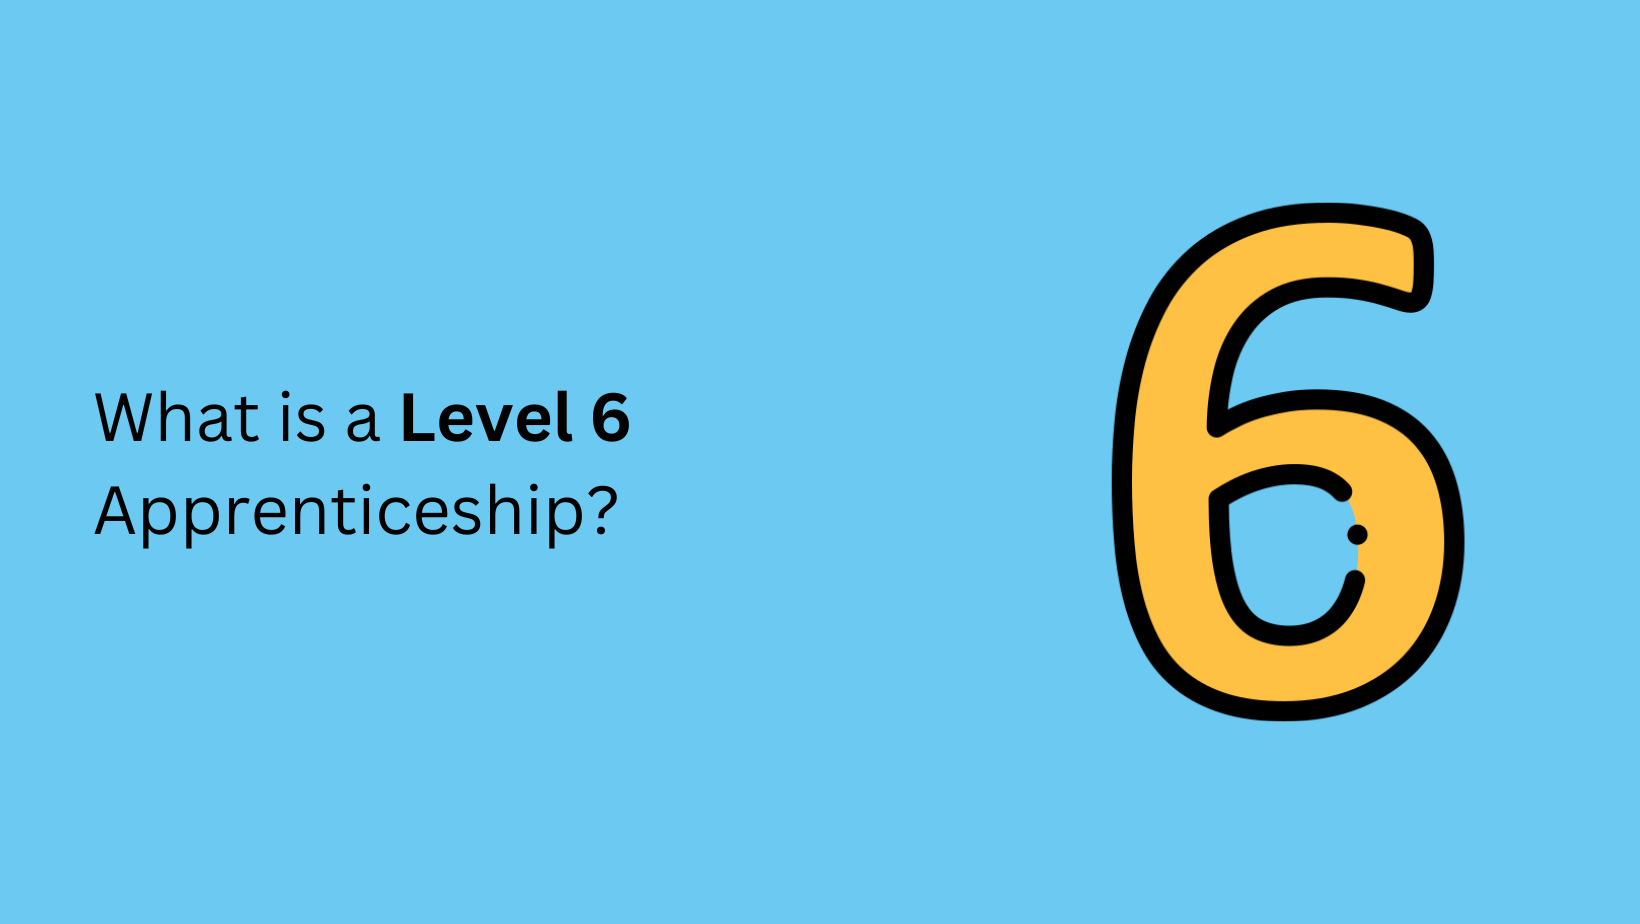 What is a Level 6 Apprenticeship